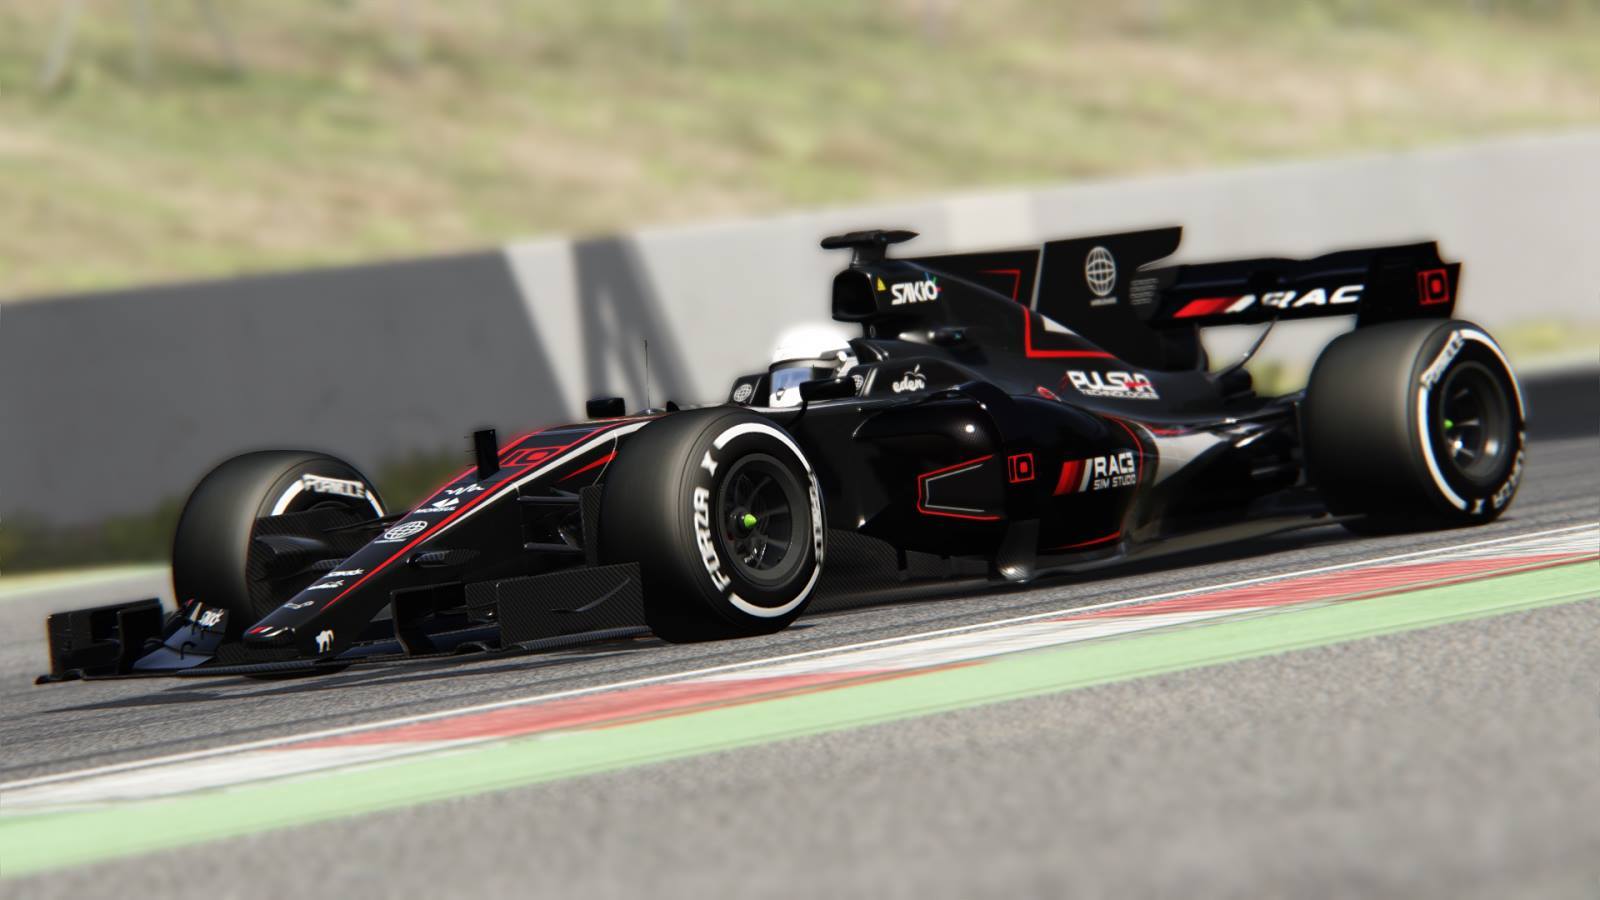 More information about "Assetto Corsa: F1 2017 by Race Sim Studio"